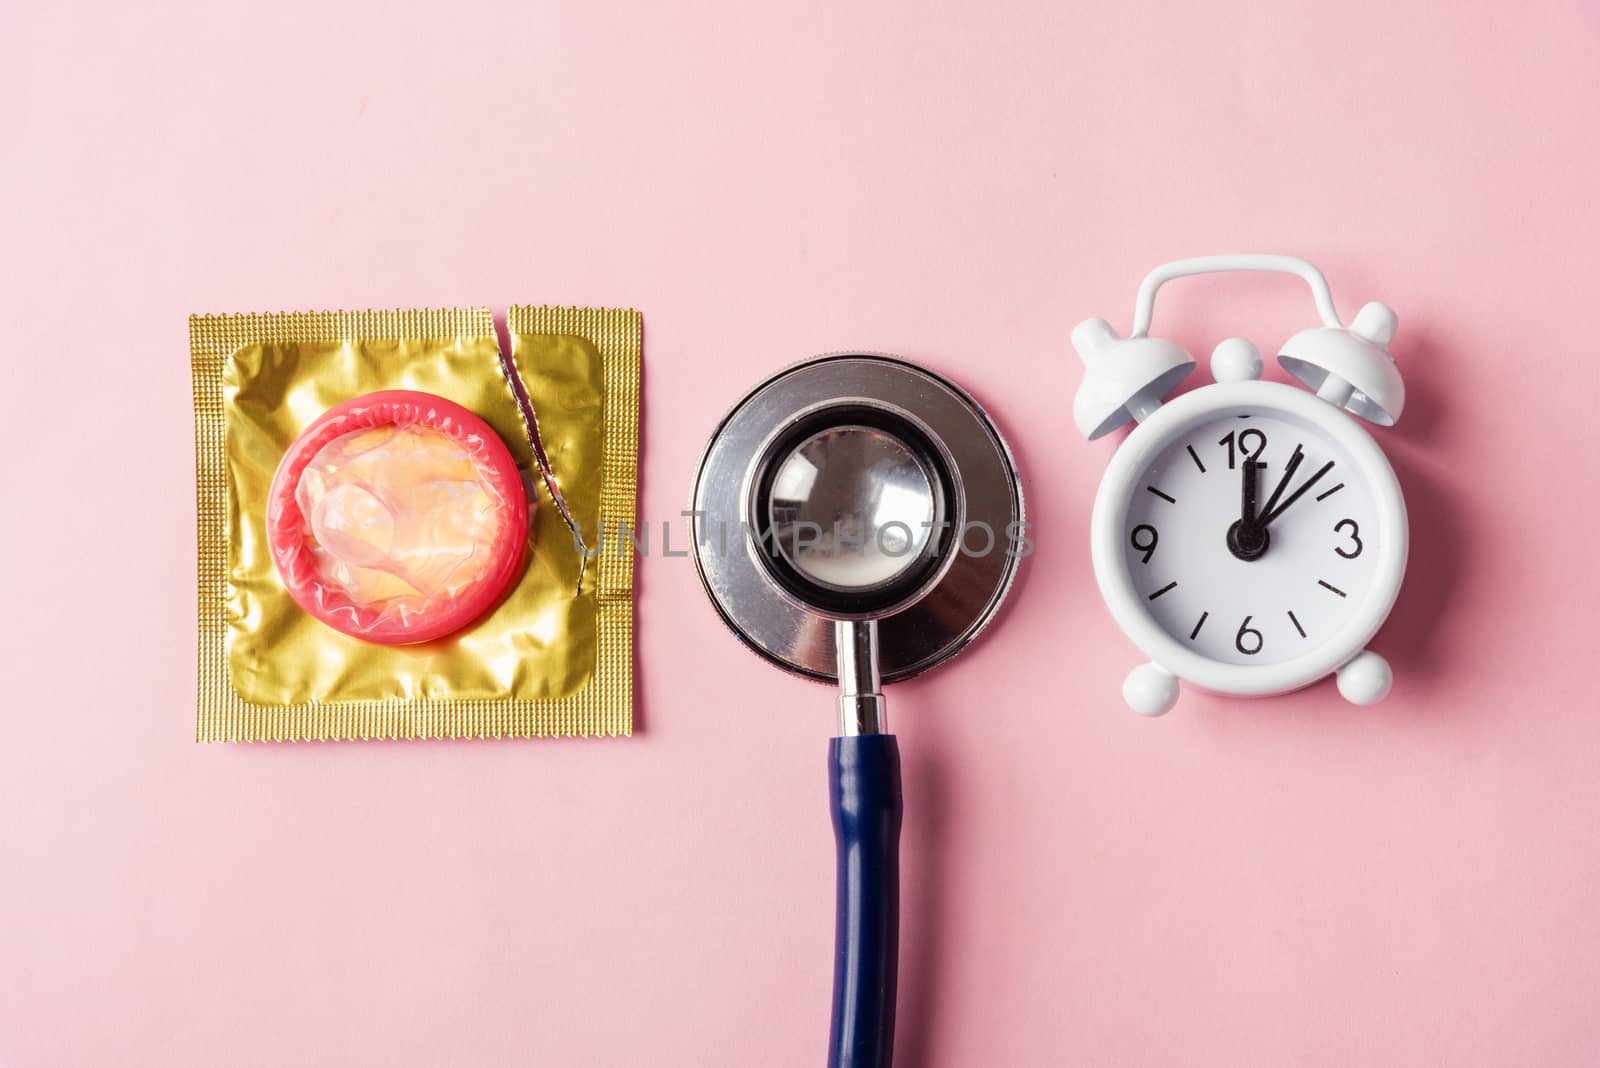 World sexual health or Aids day, Top view flat lay medical equipment, condom in a pack, stethoscope and alarm clock, studio shot isolated on a pink background, Safe sex and reproductive health concept